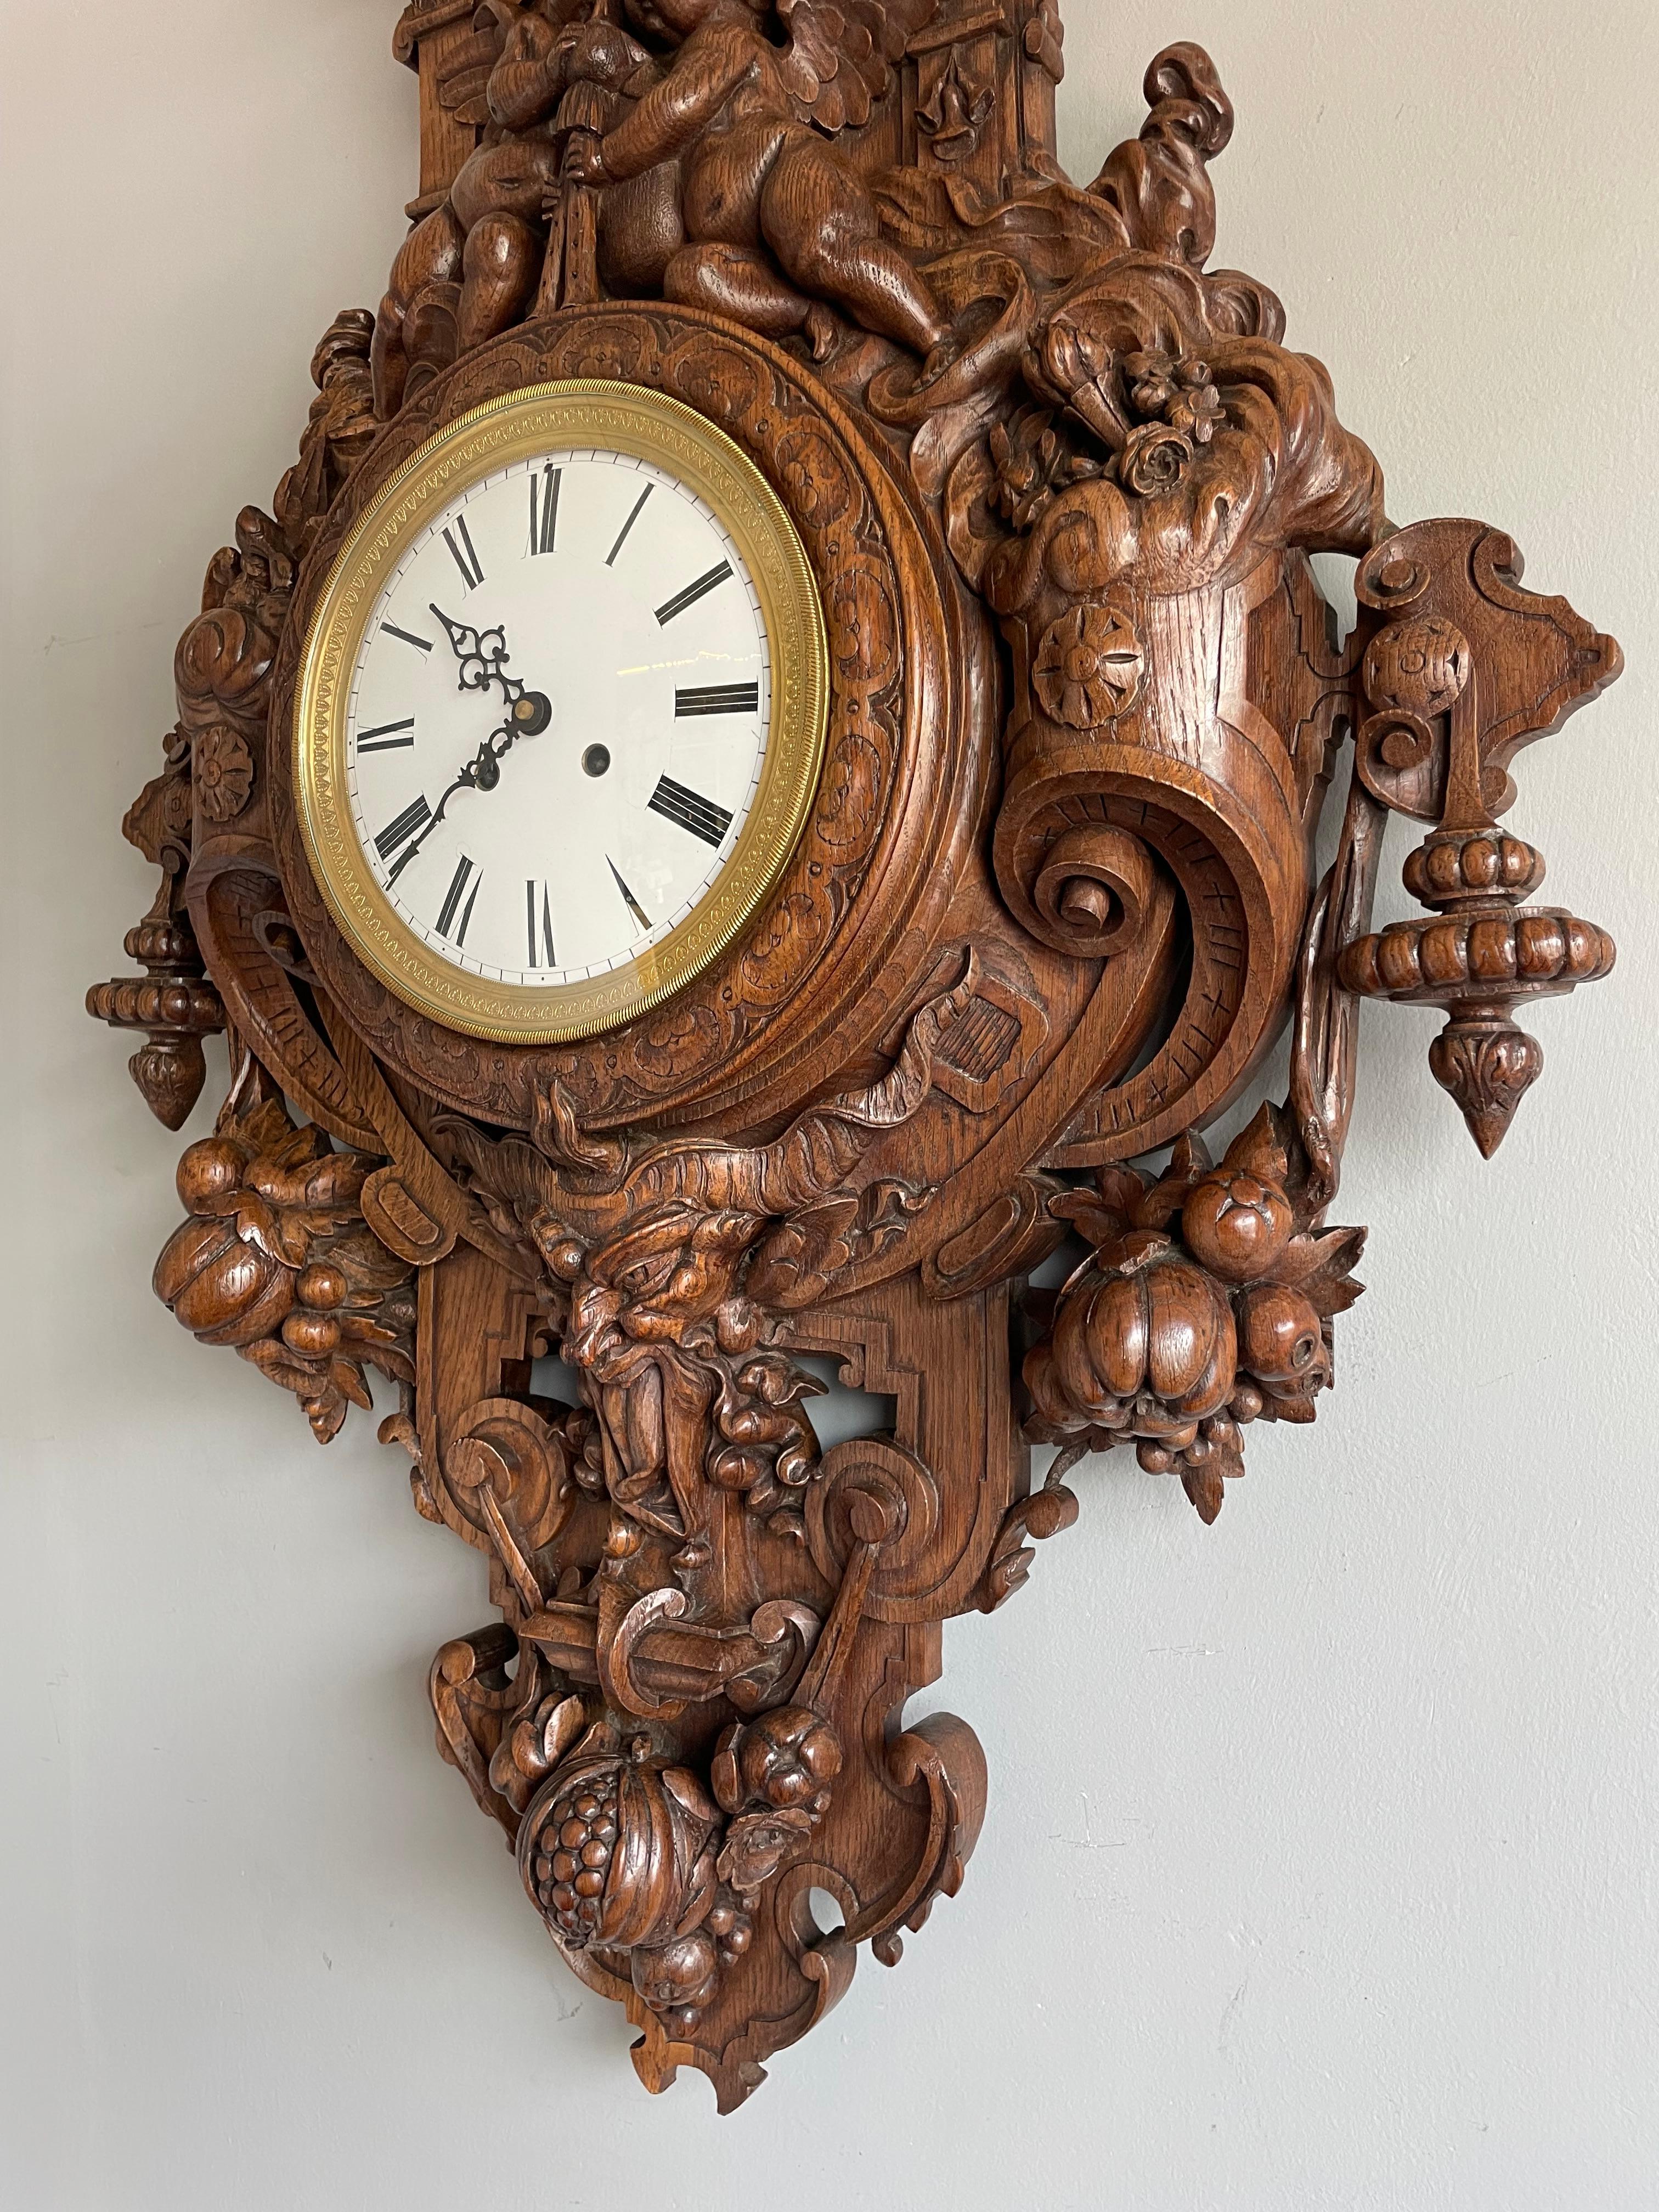 French Antique & Huge Hand Carved Wall Clock by Parisian Top Makers Guéret Frères 1860s For Sale